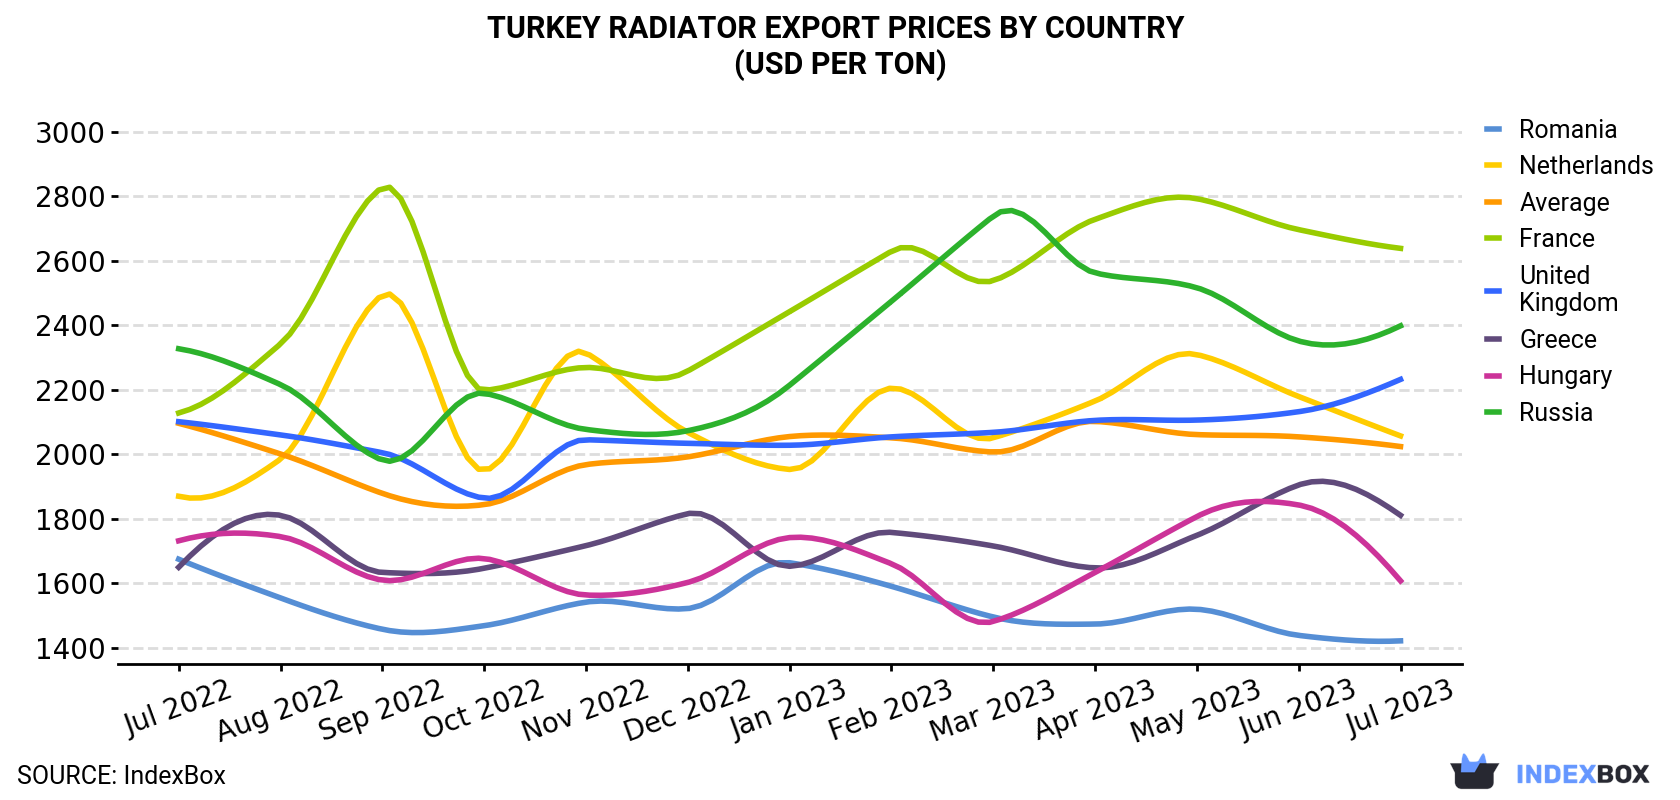 Turkey Radiator Export Prices By Country (USD Per Ton)